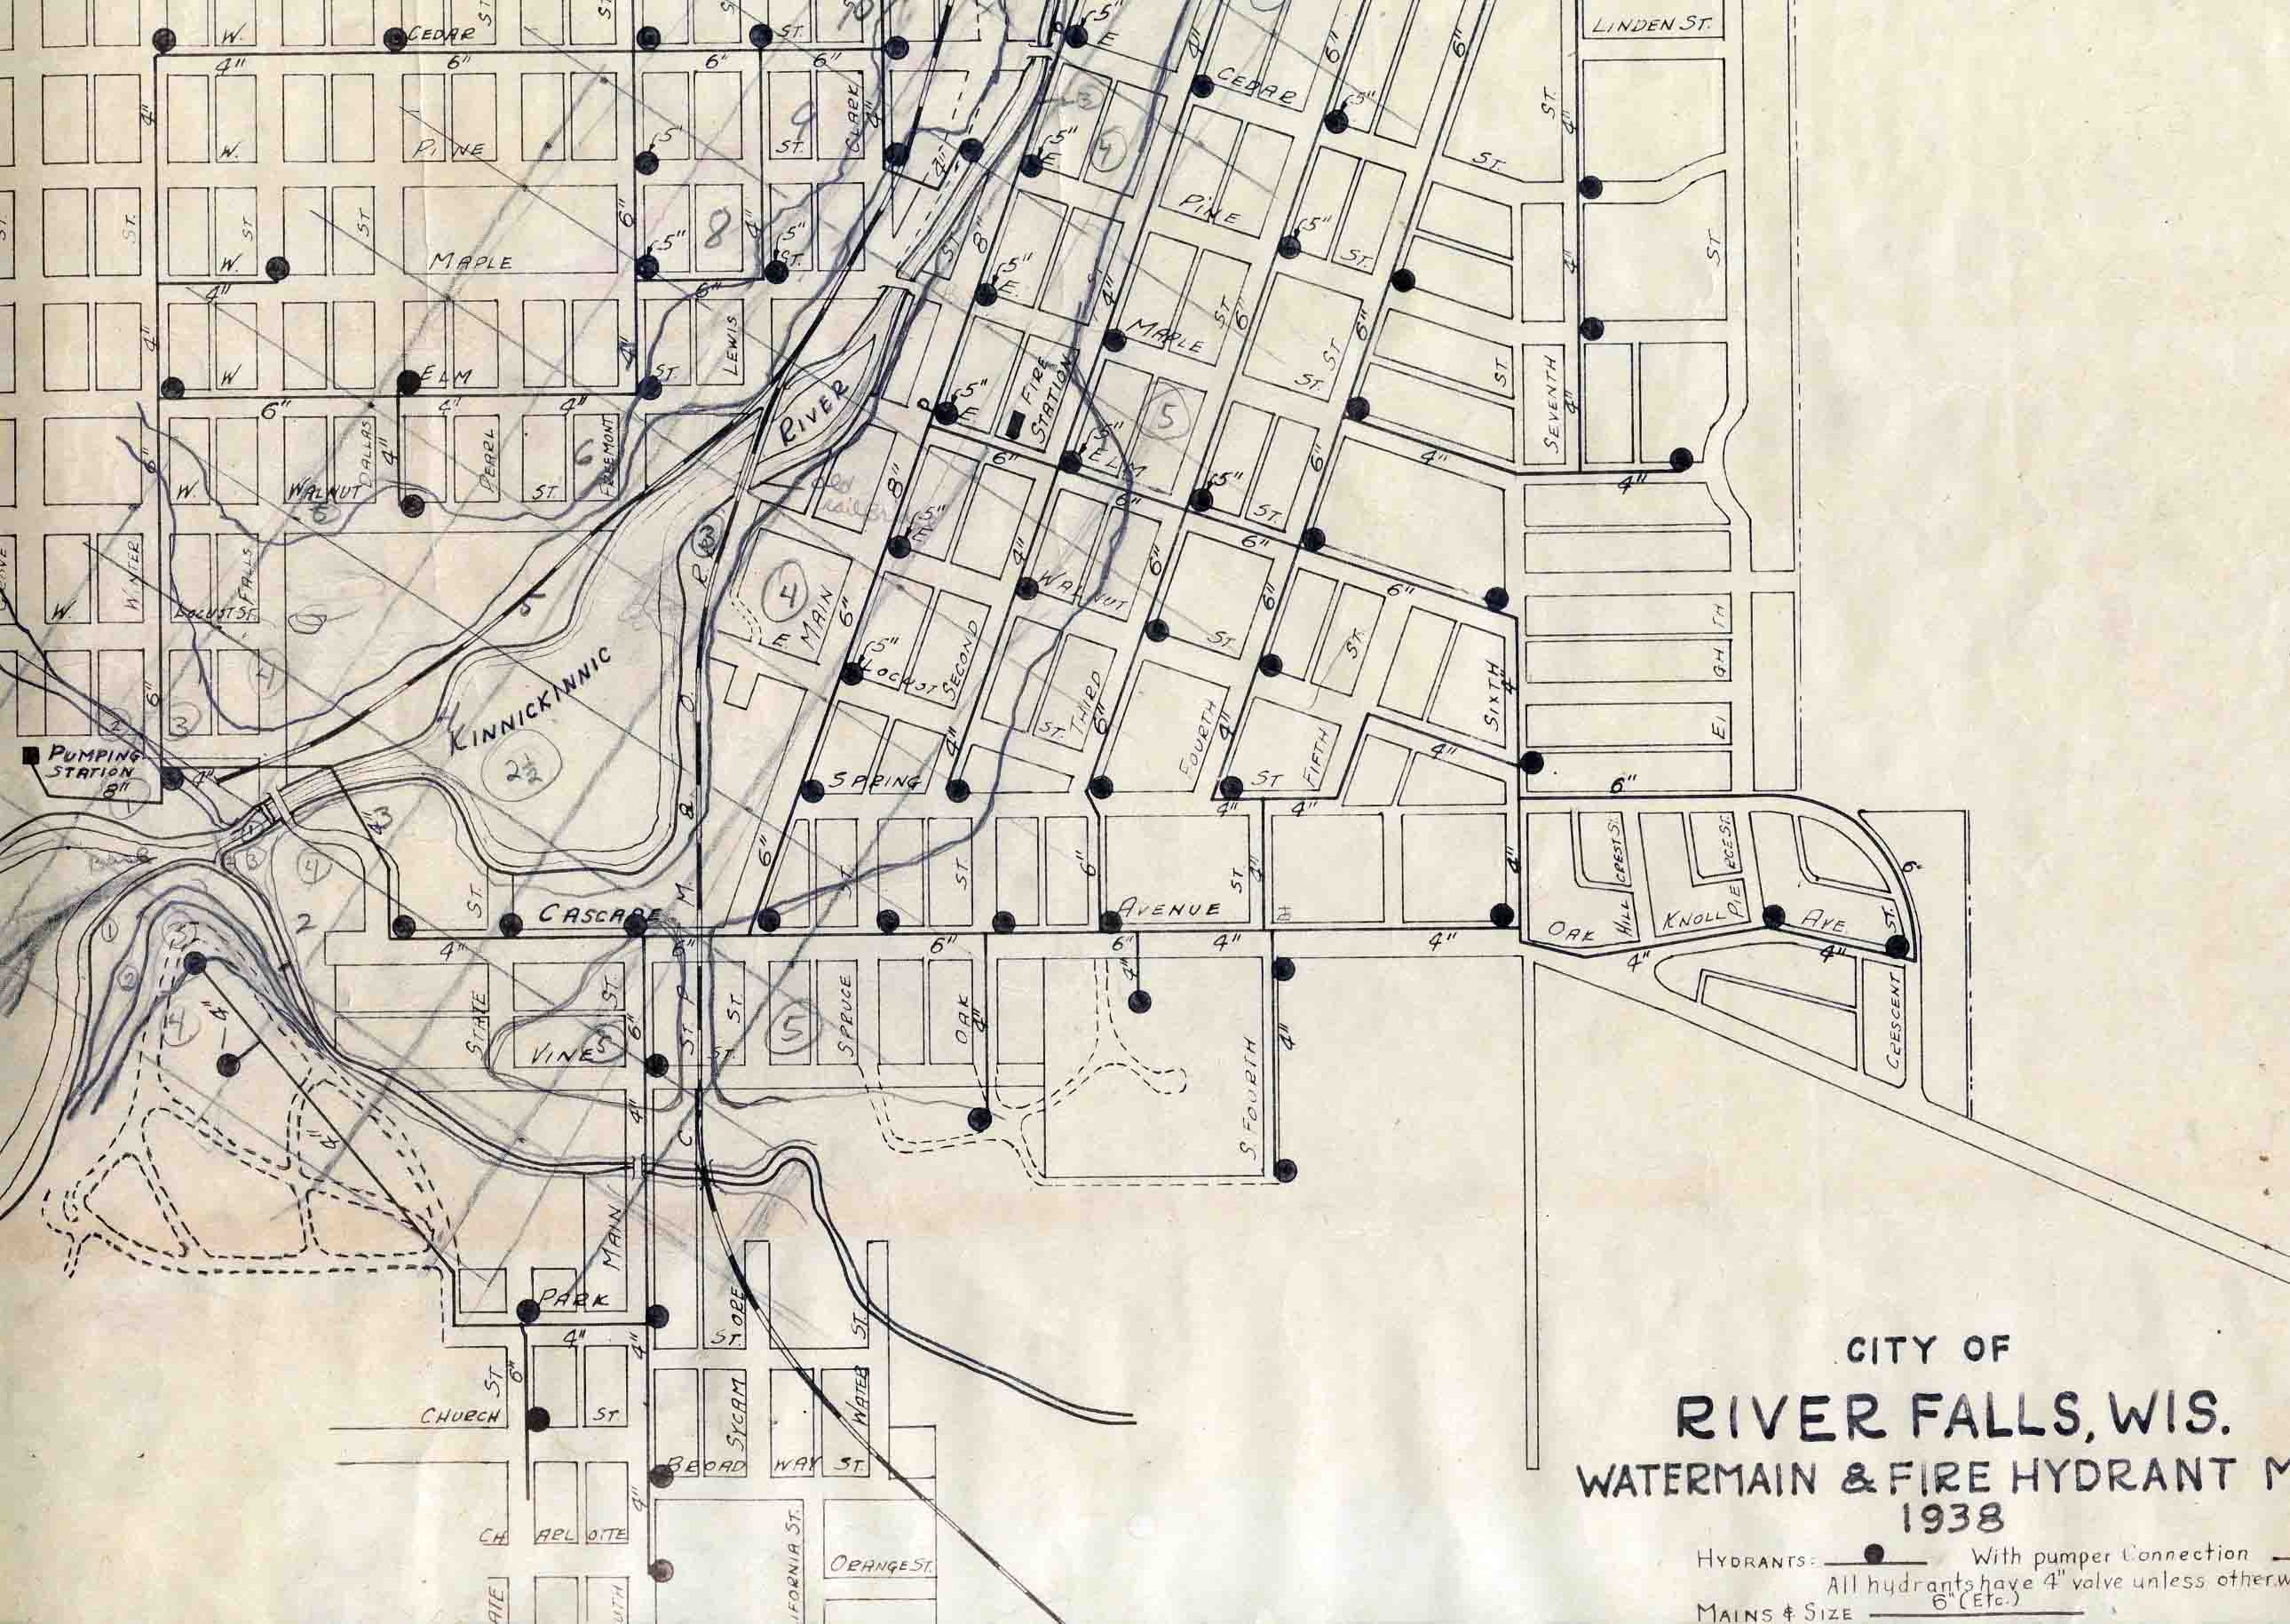 1938 Map of River Falls watermains and fire hydrants